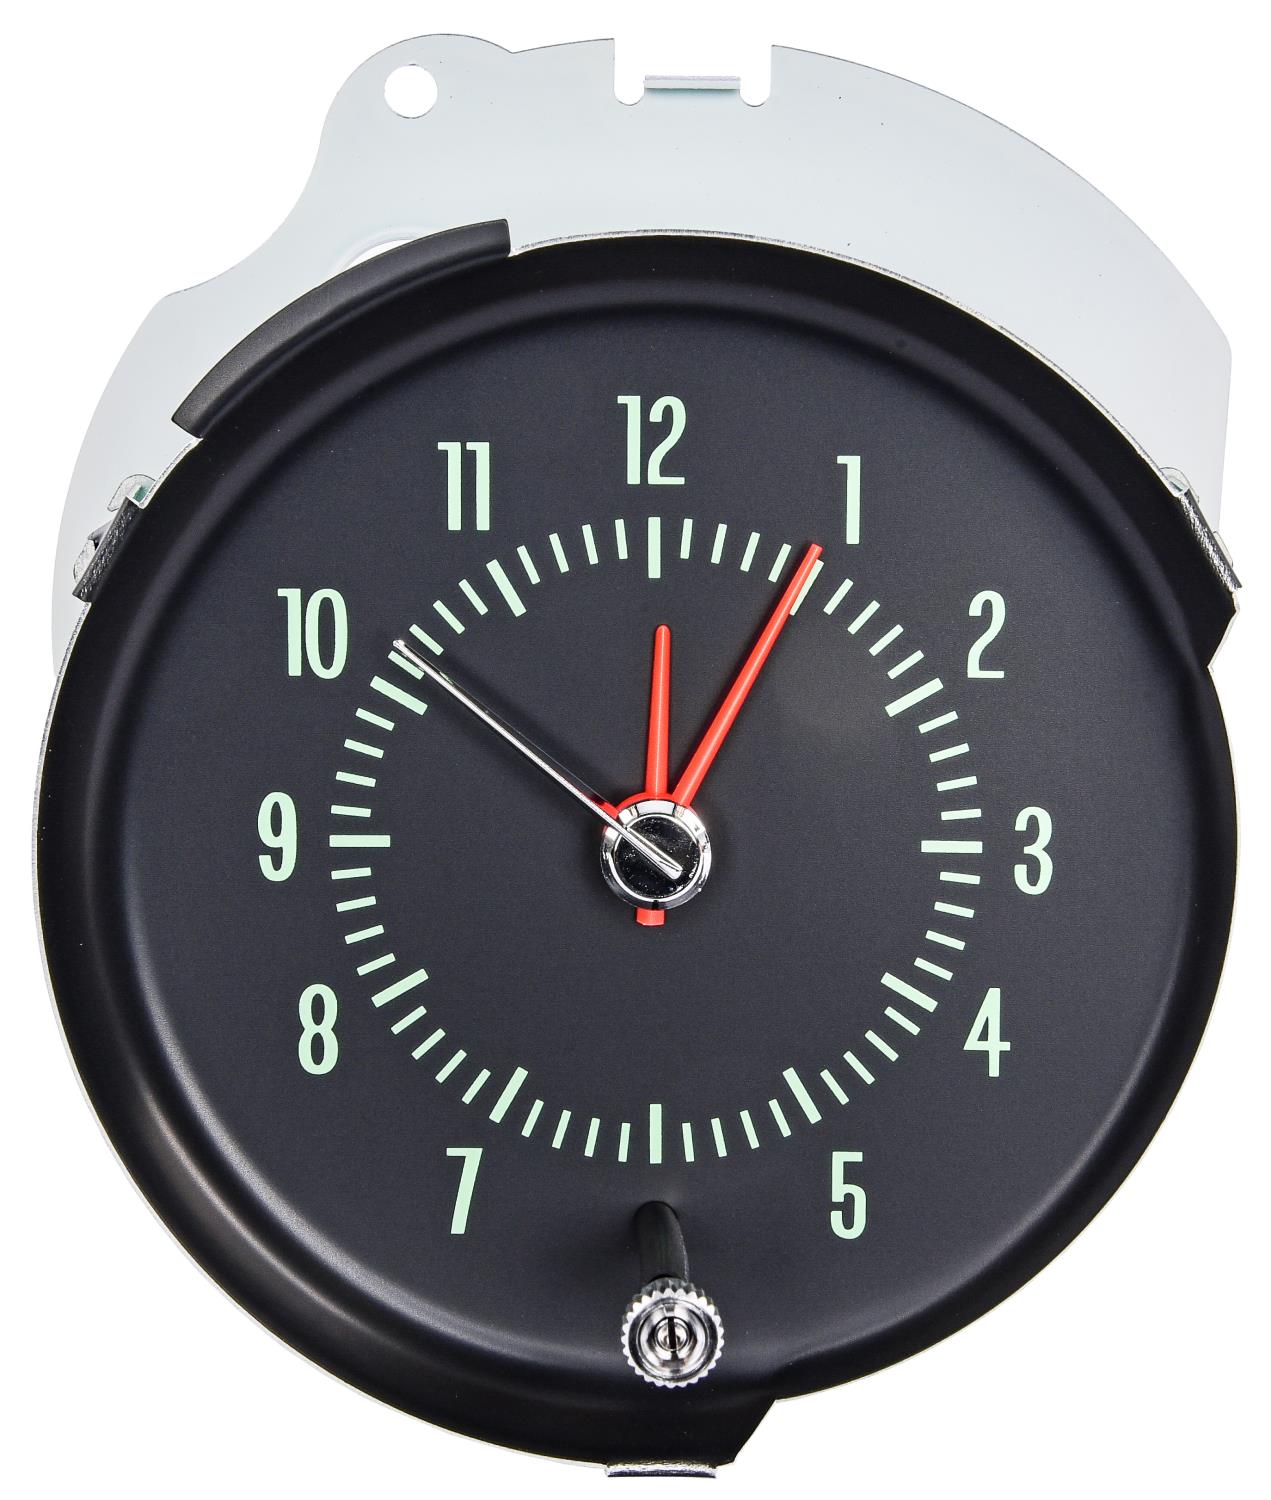 Factory Style Clock for 1970 Chevrolet Chevelle, El Camino and Monte Carlo with SS Dash